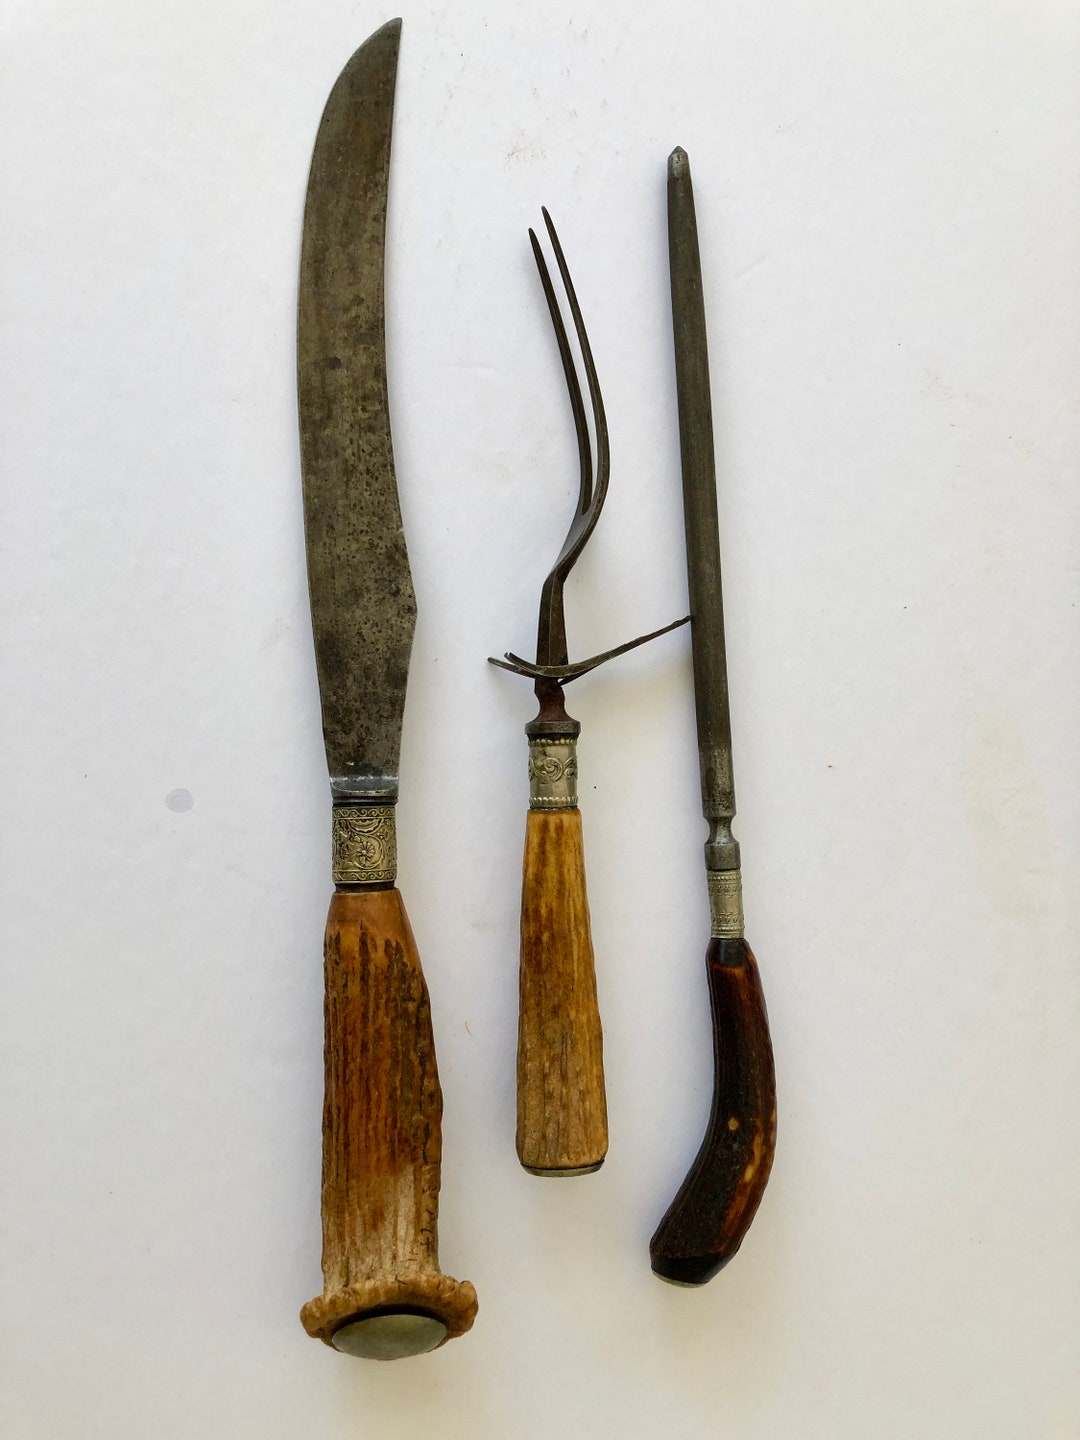 ANTIQUE 1880'S BRANTFORD CUTLERY CO. NEVER DULL STAG HANDLE CARVING SET